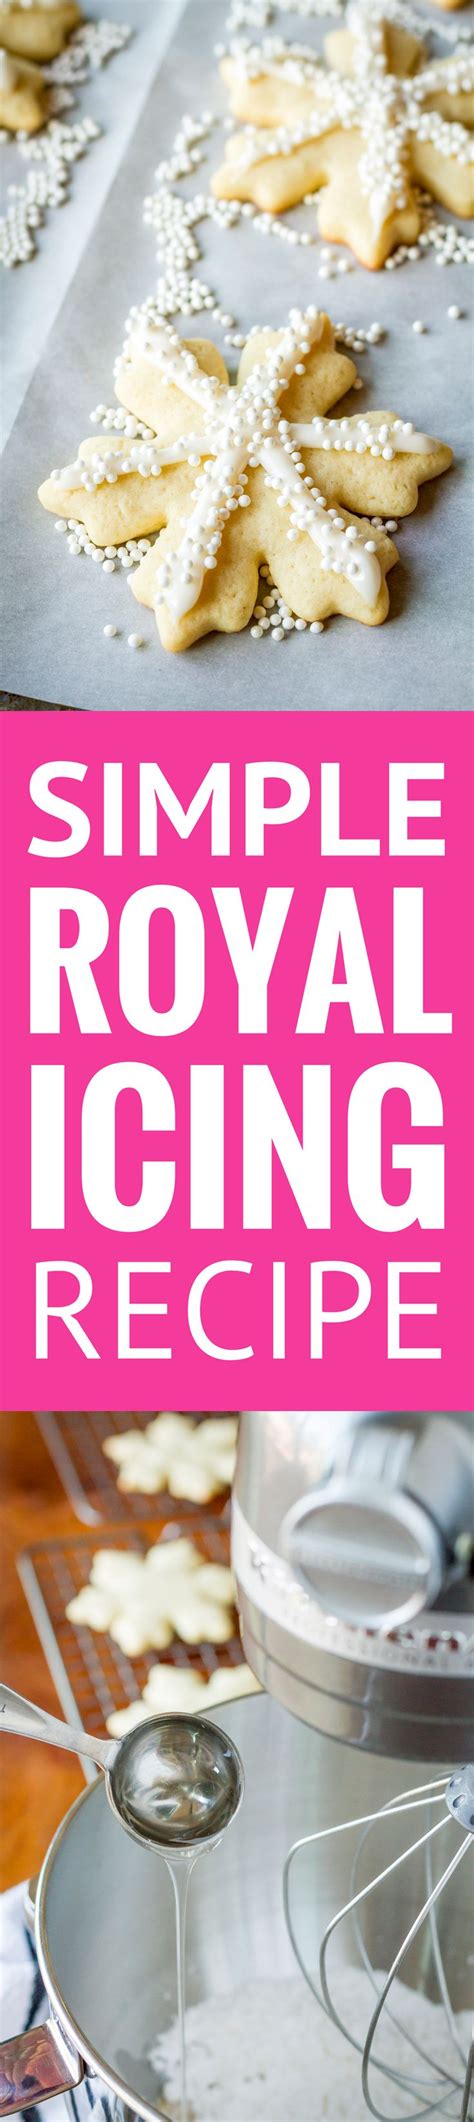 It has the most delicious taste and texture and makes decorating sugar cookies fun and simple. Simple Royal Icing Recipe -- this royal icing is SO ...